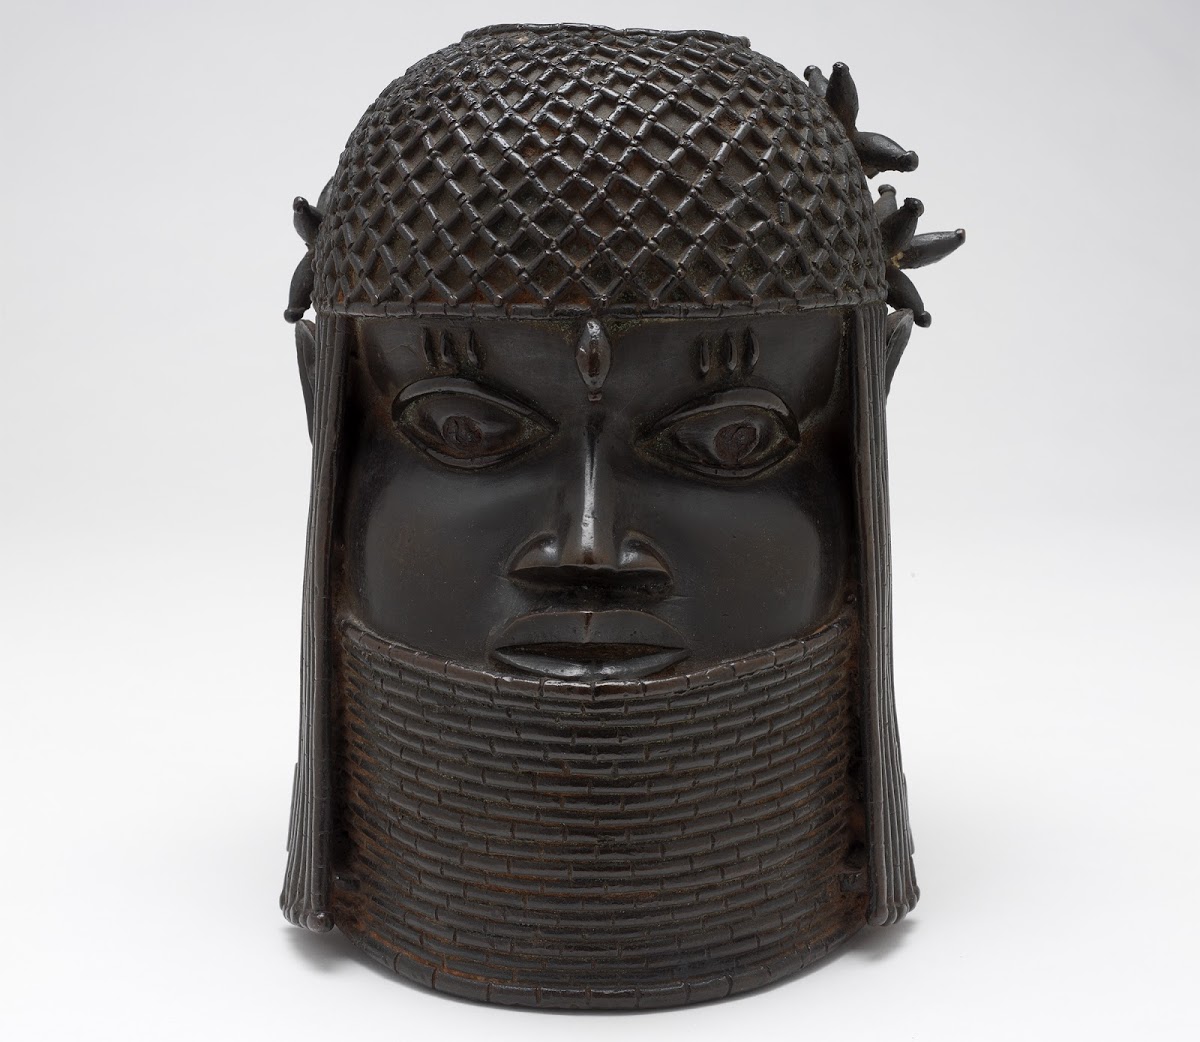 Deaccessioned Benines Head of a King (Oba), probably 1700s